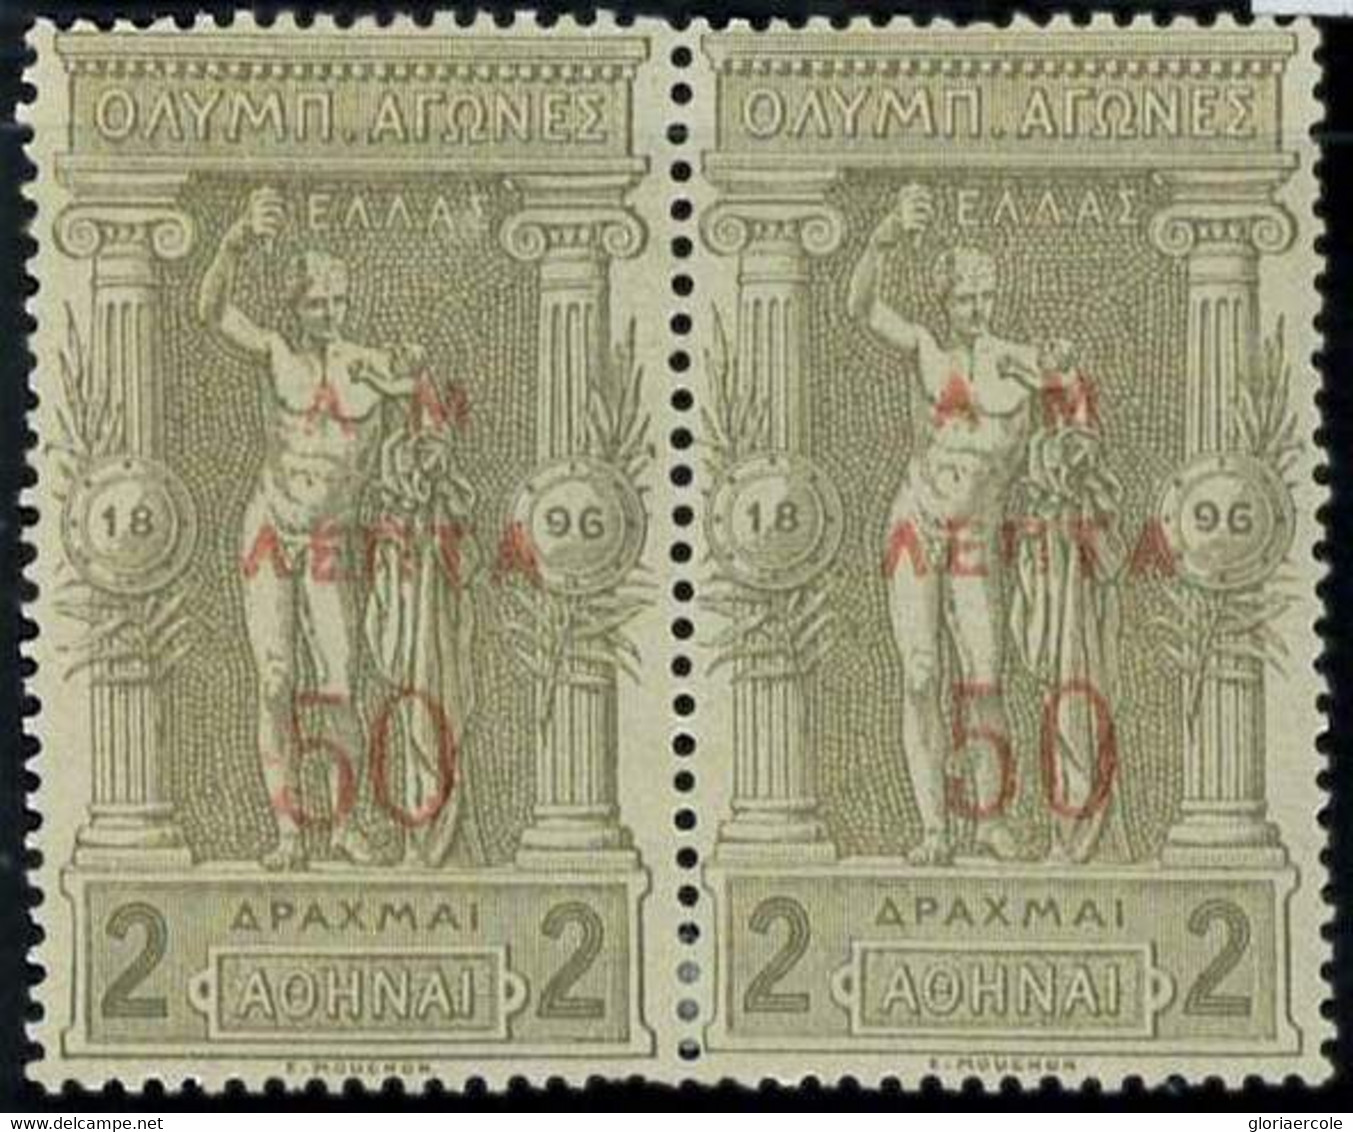 BK1839e - GREECE - 1896 Olympic Games 2 Drachma Yvert # 145 Pair - MH  VWC Very Well Centered - Zomer 1896: Athene